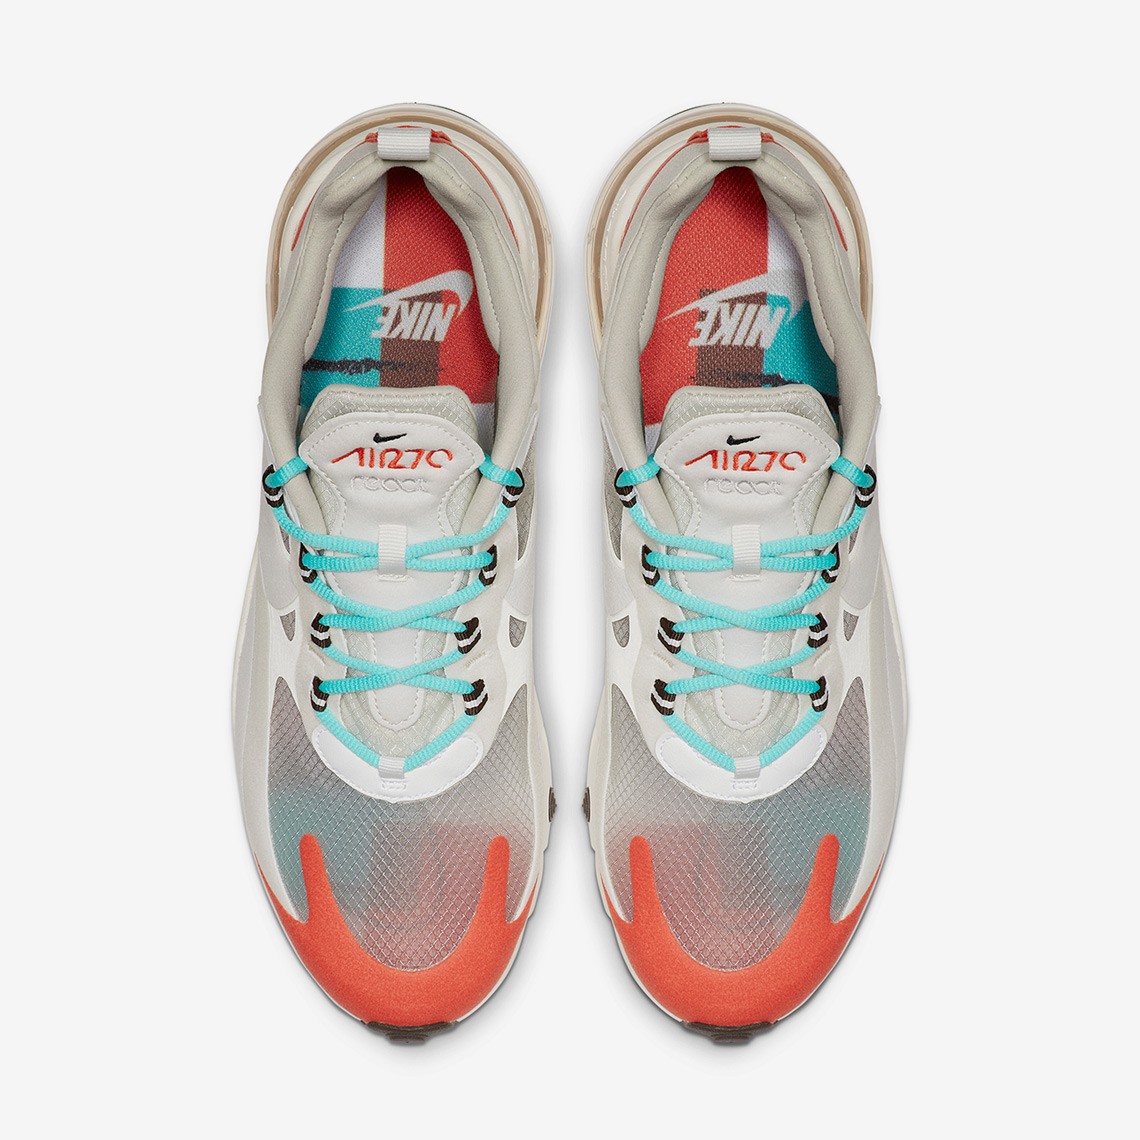 when did the nike air max 270 react come out